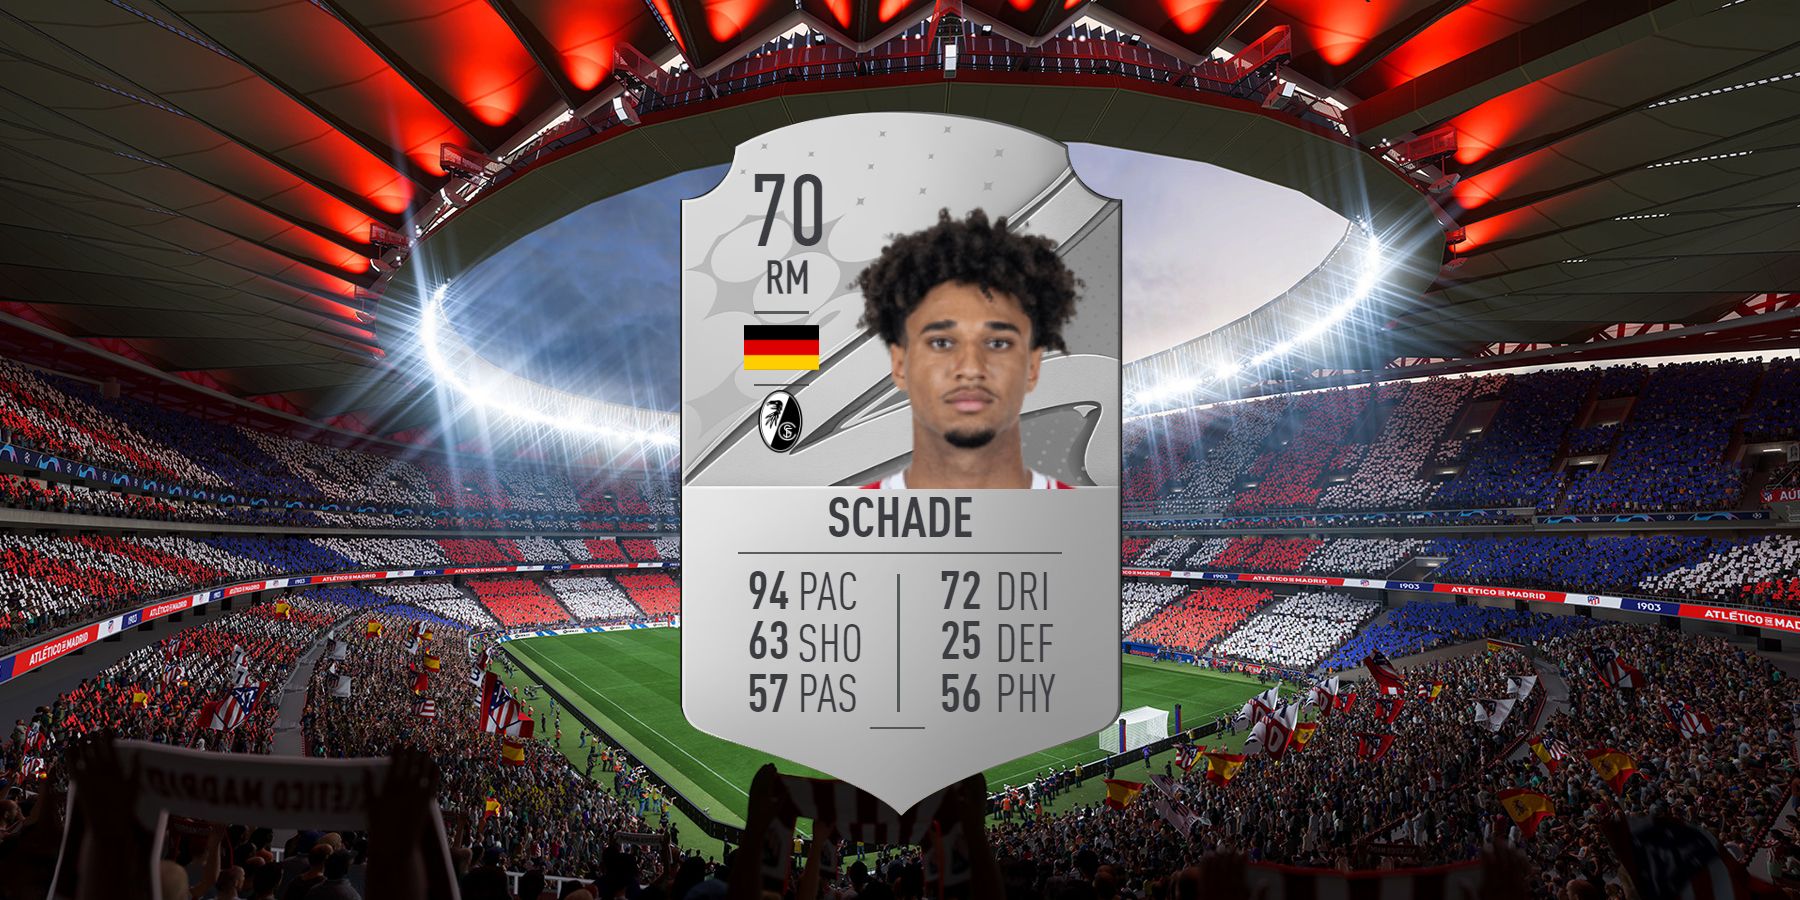 Kevin Schade (94 Pace)